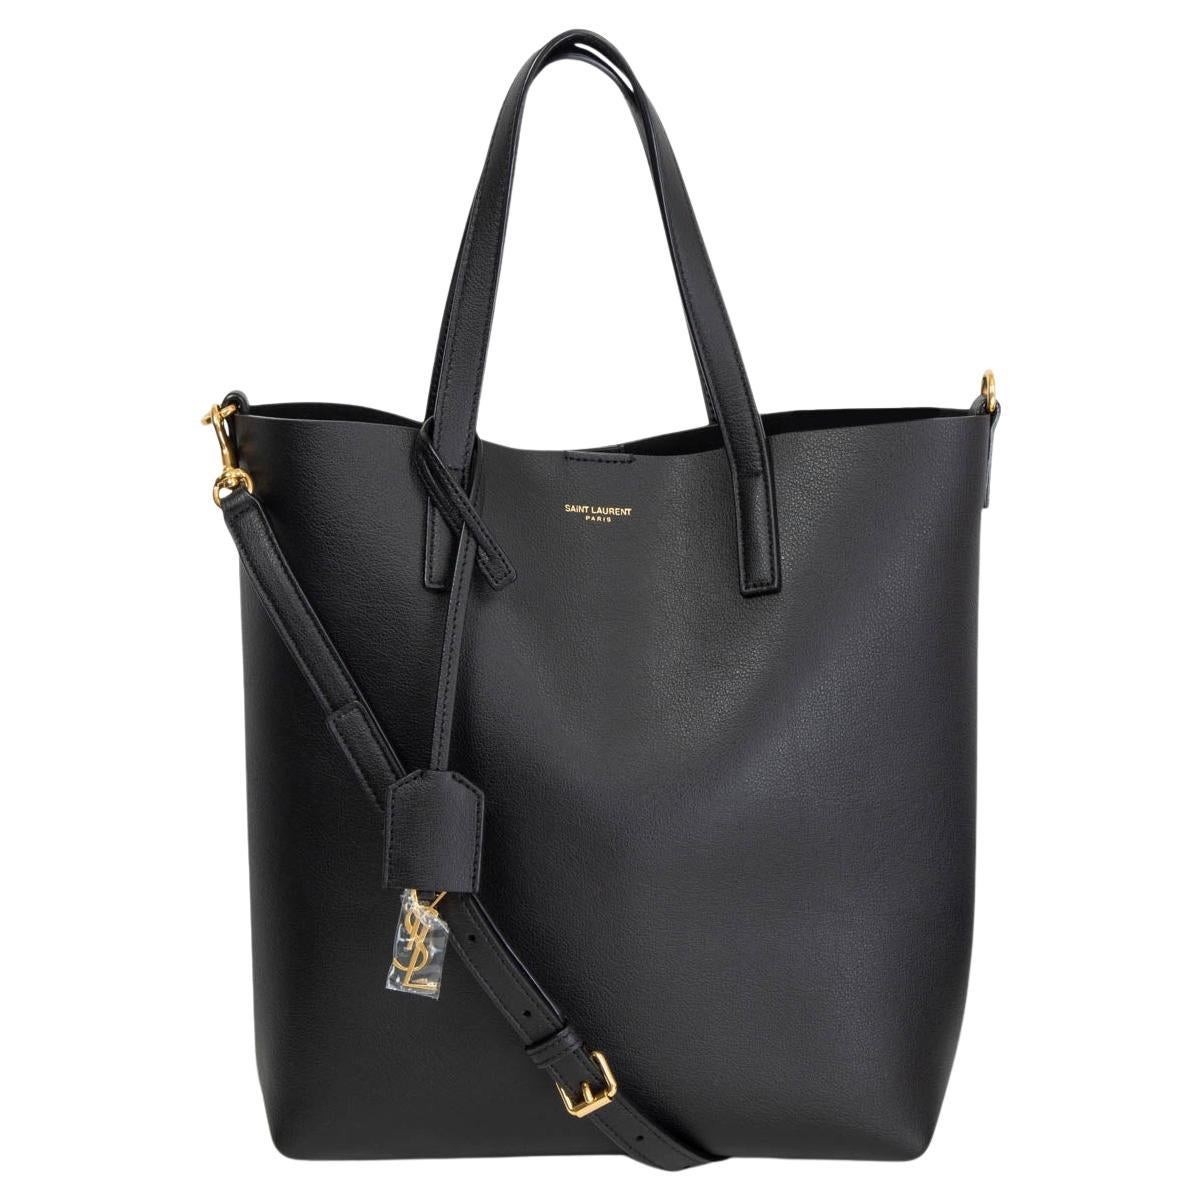 SAINT LAURENT black leather SHOPPING TOY Tote Bag